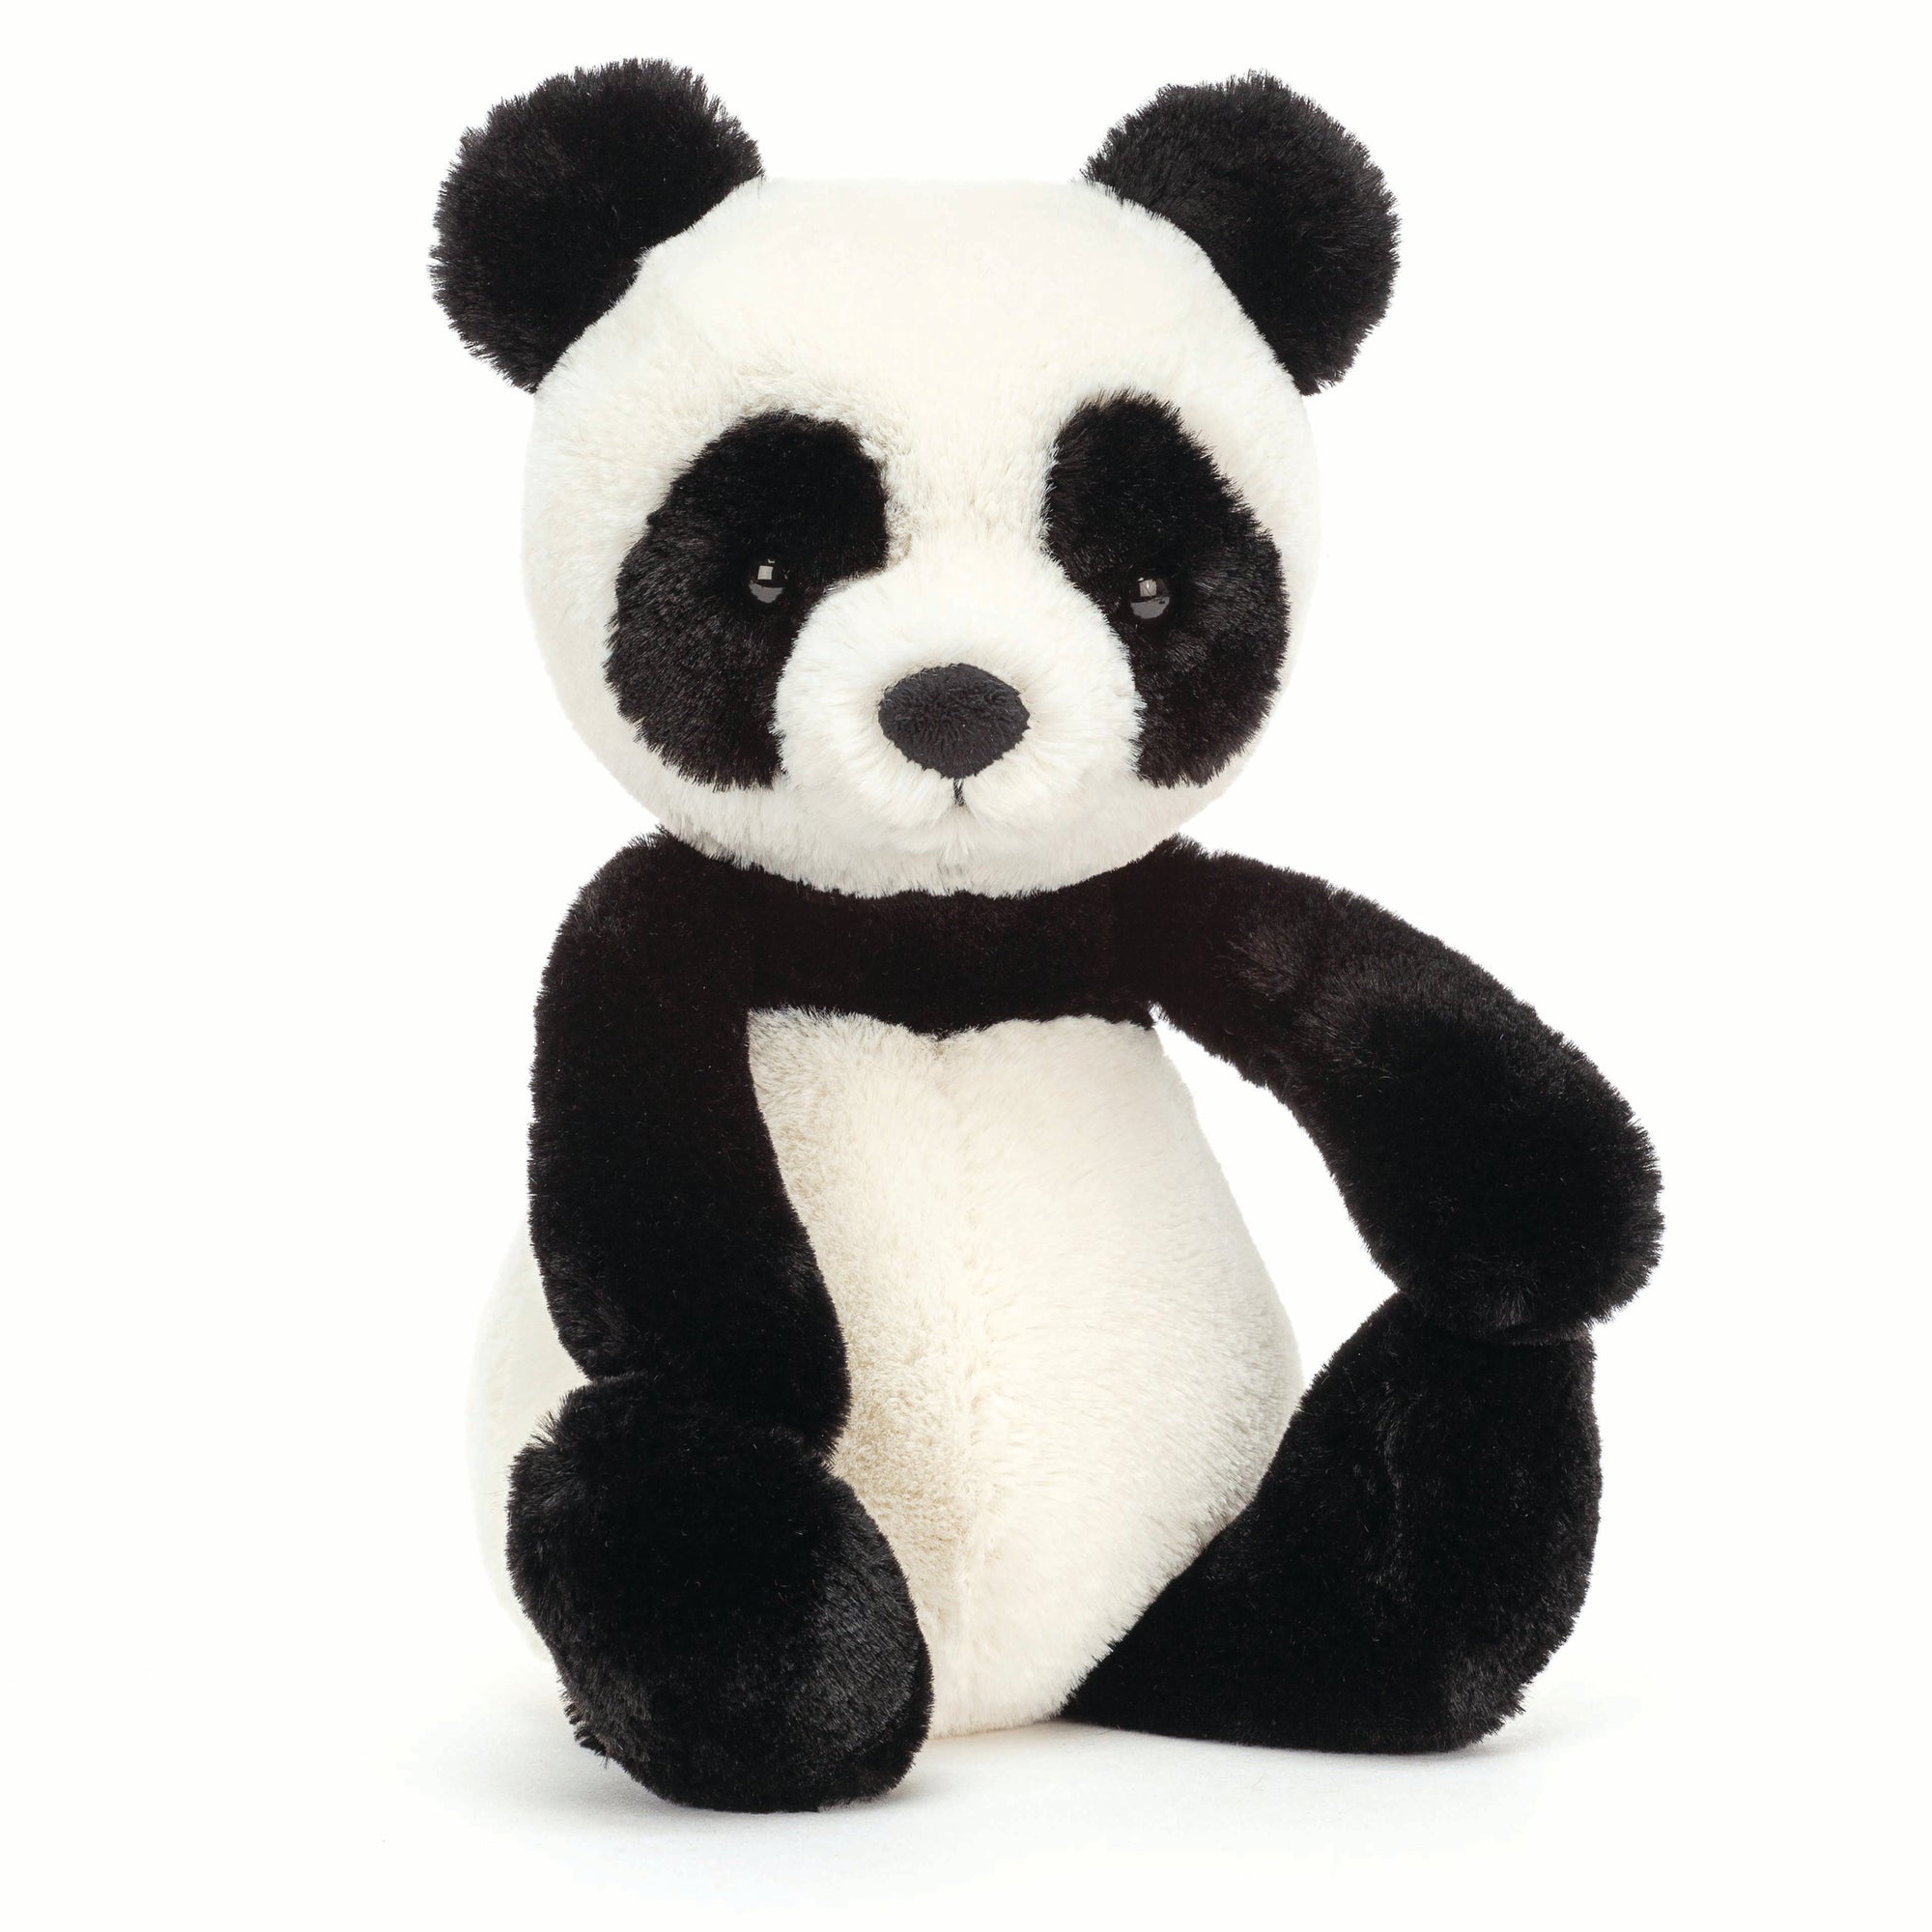 jellycat panda - angus and dudley